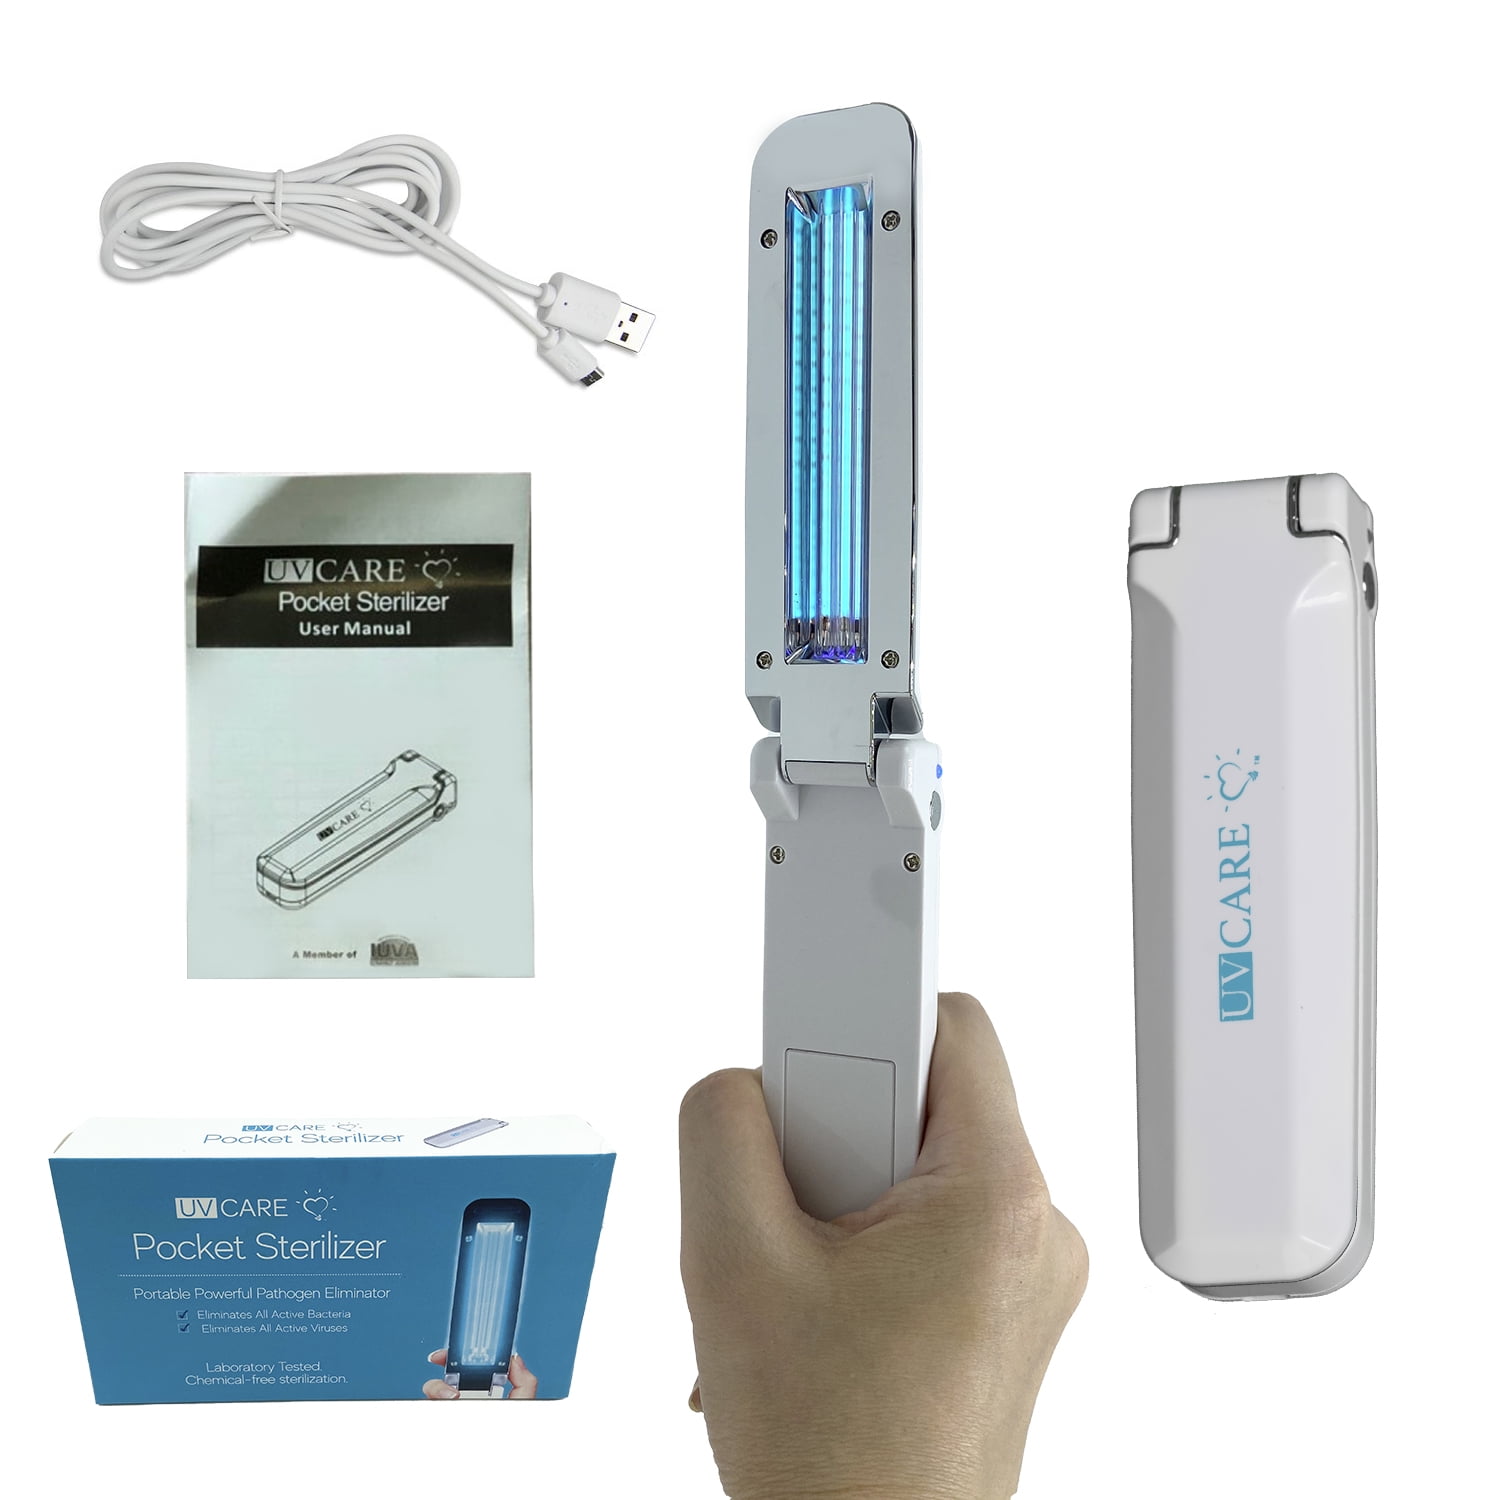 Uvc Lamp Viruses Germs Bacteria Killer of Mobile Phones And Keyboards Uv Sterilizer Wand 